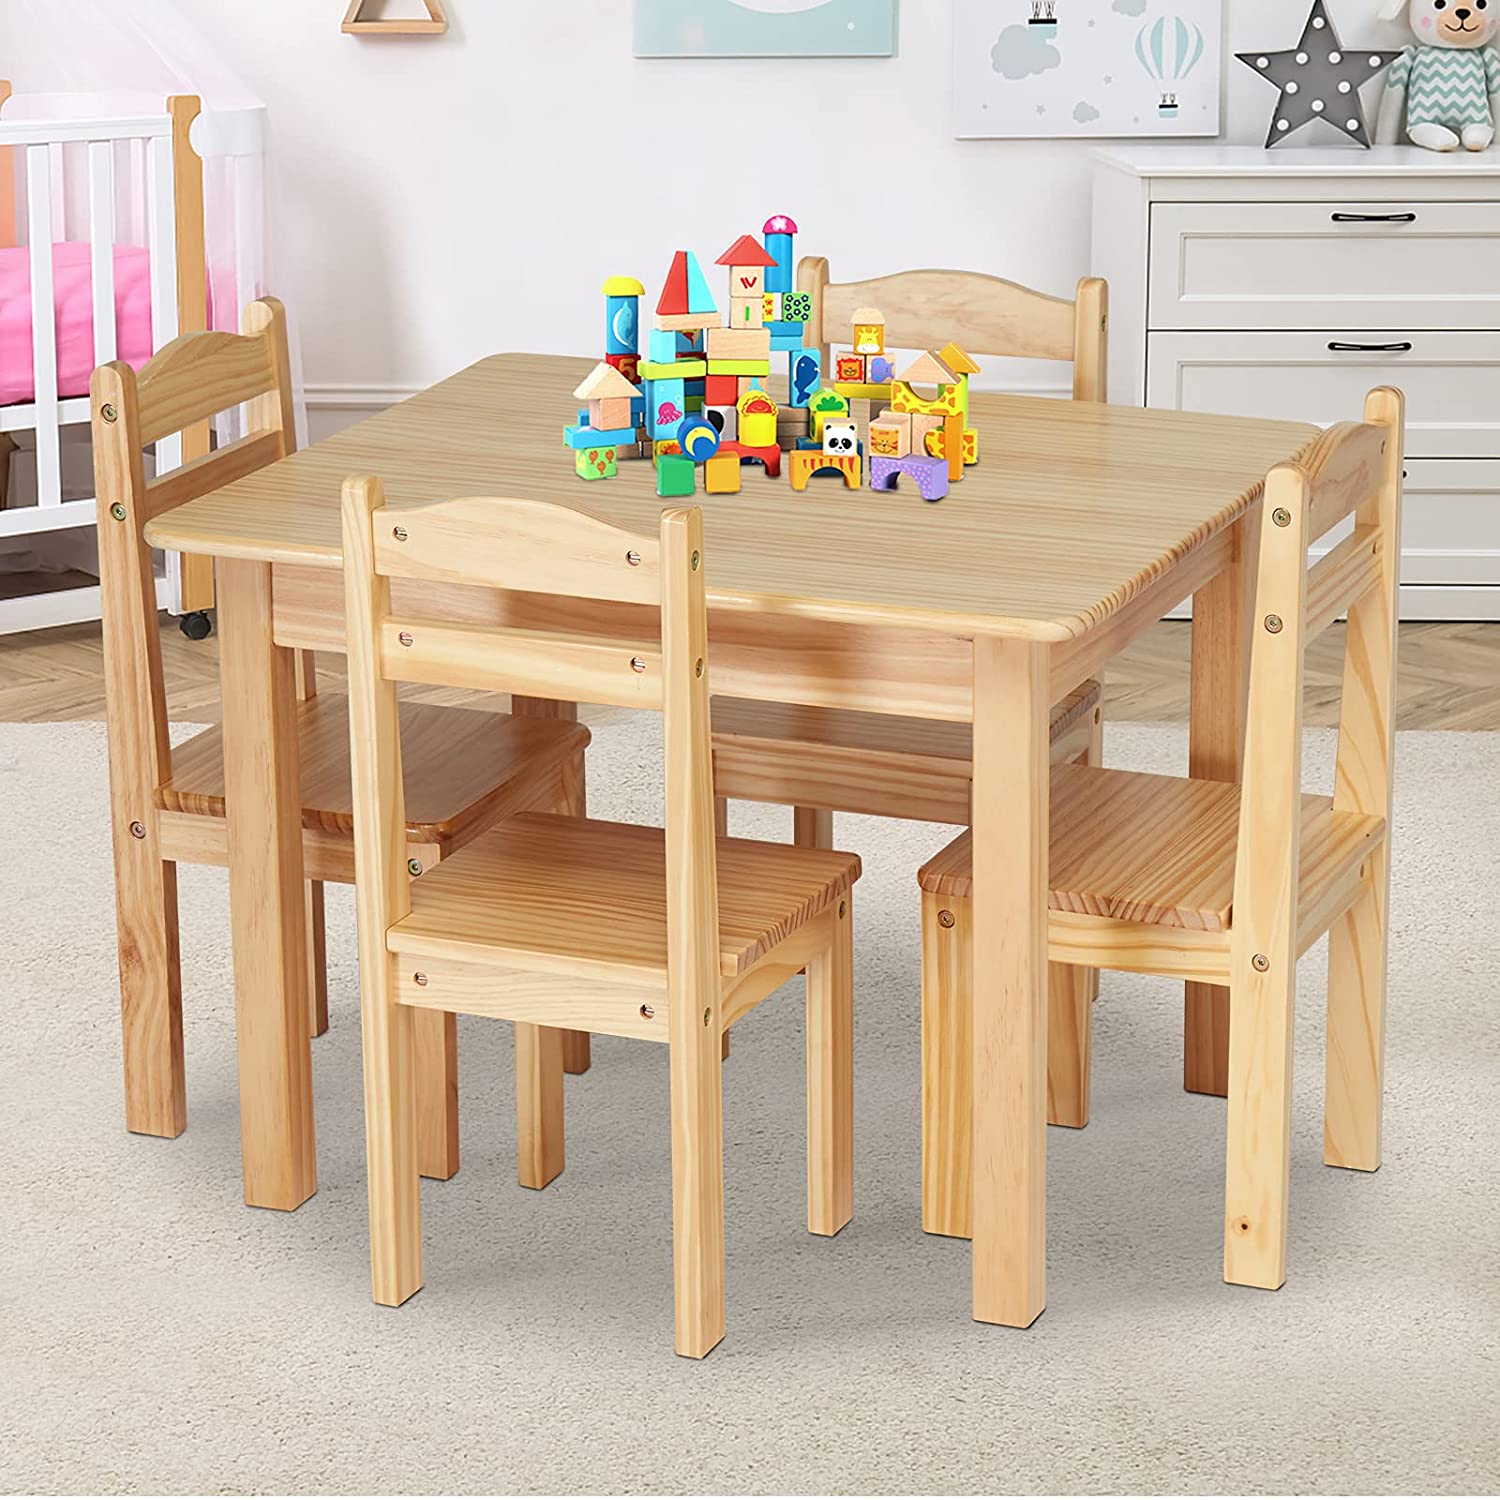 Kids Wooden Table and 4 Chairs Playroom Furniture Kindergarten Table   (3).jpg